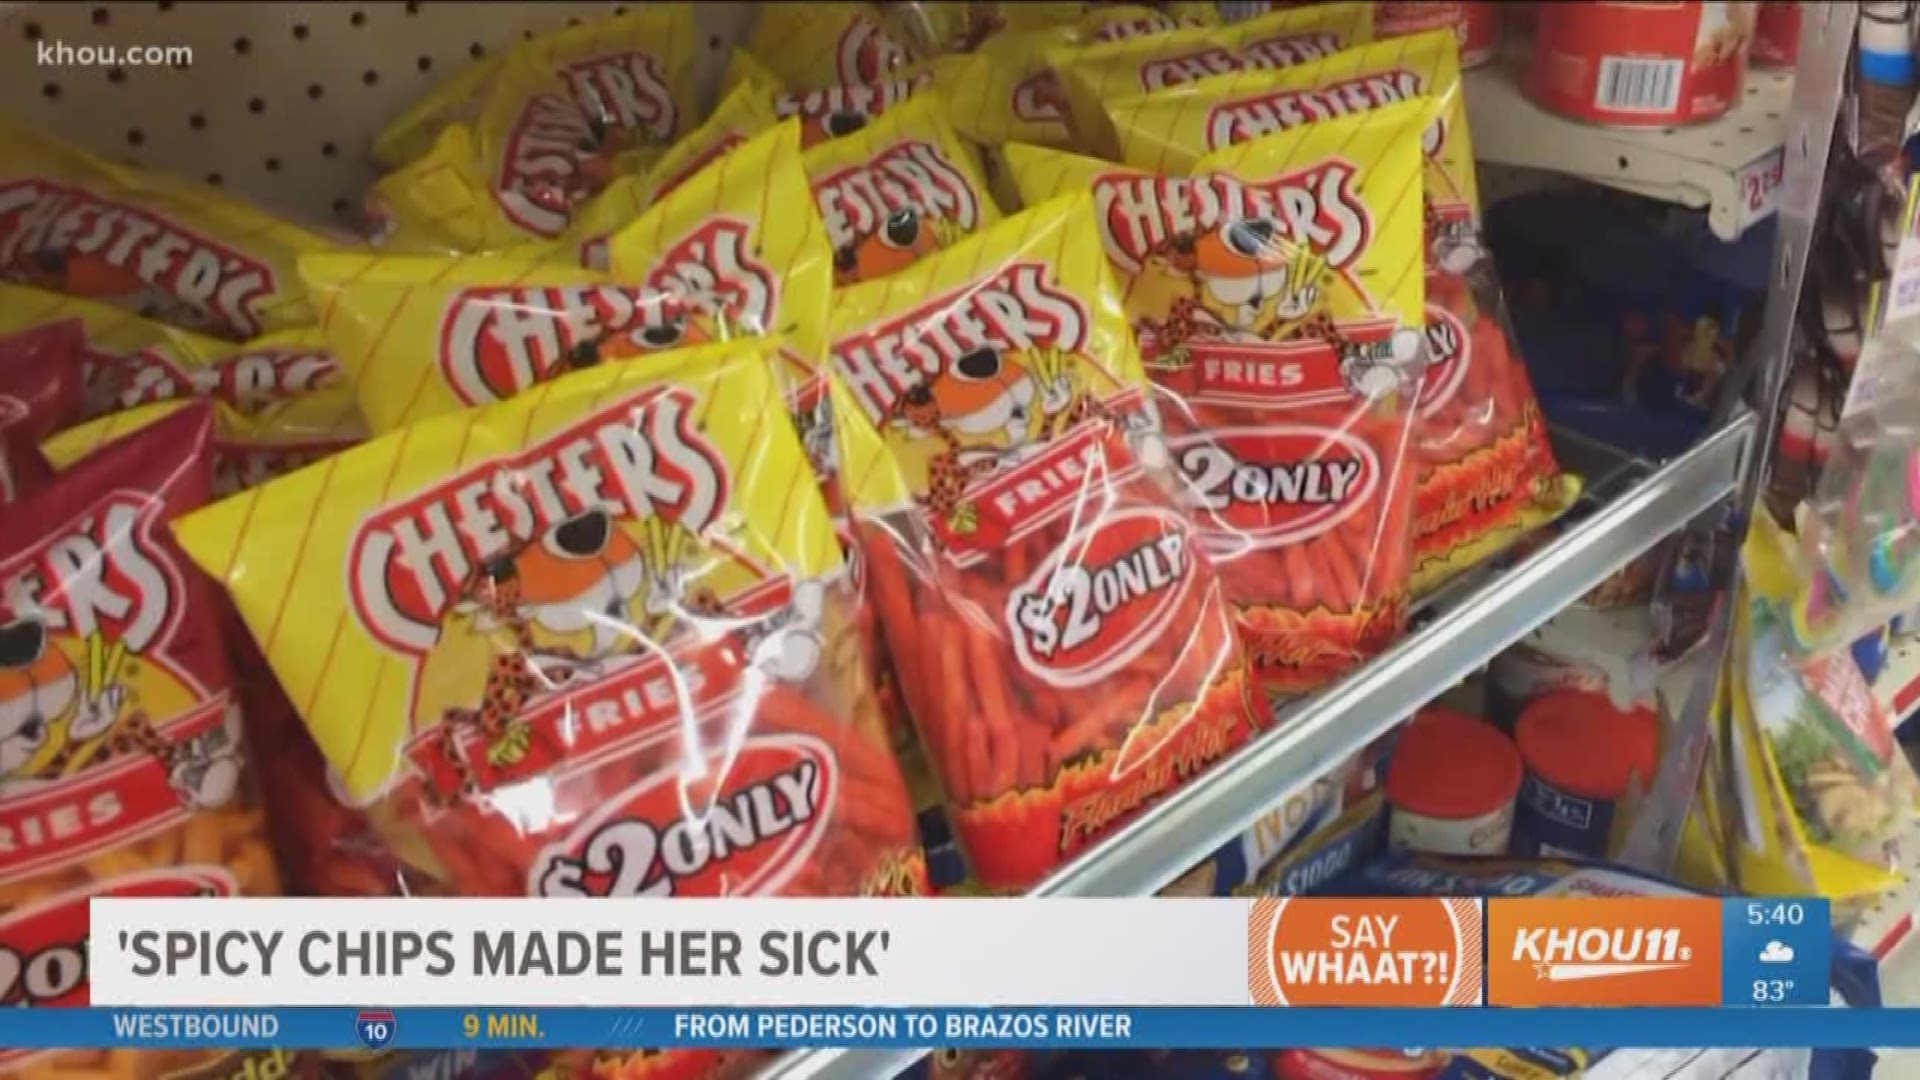 KHOU 11 News This Morning reports on why you shouldn't eat too many of those spicy snacks.